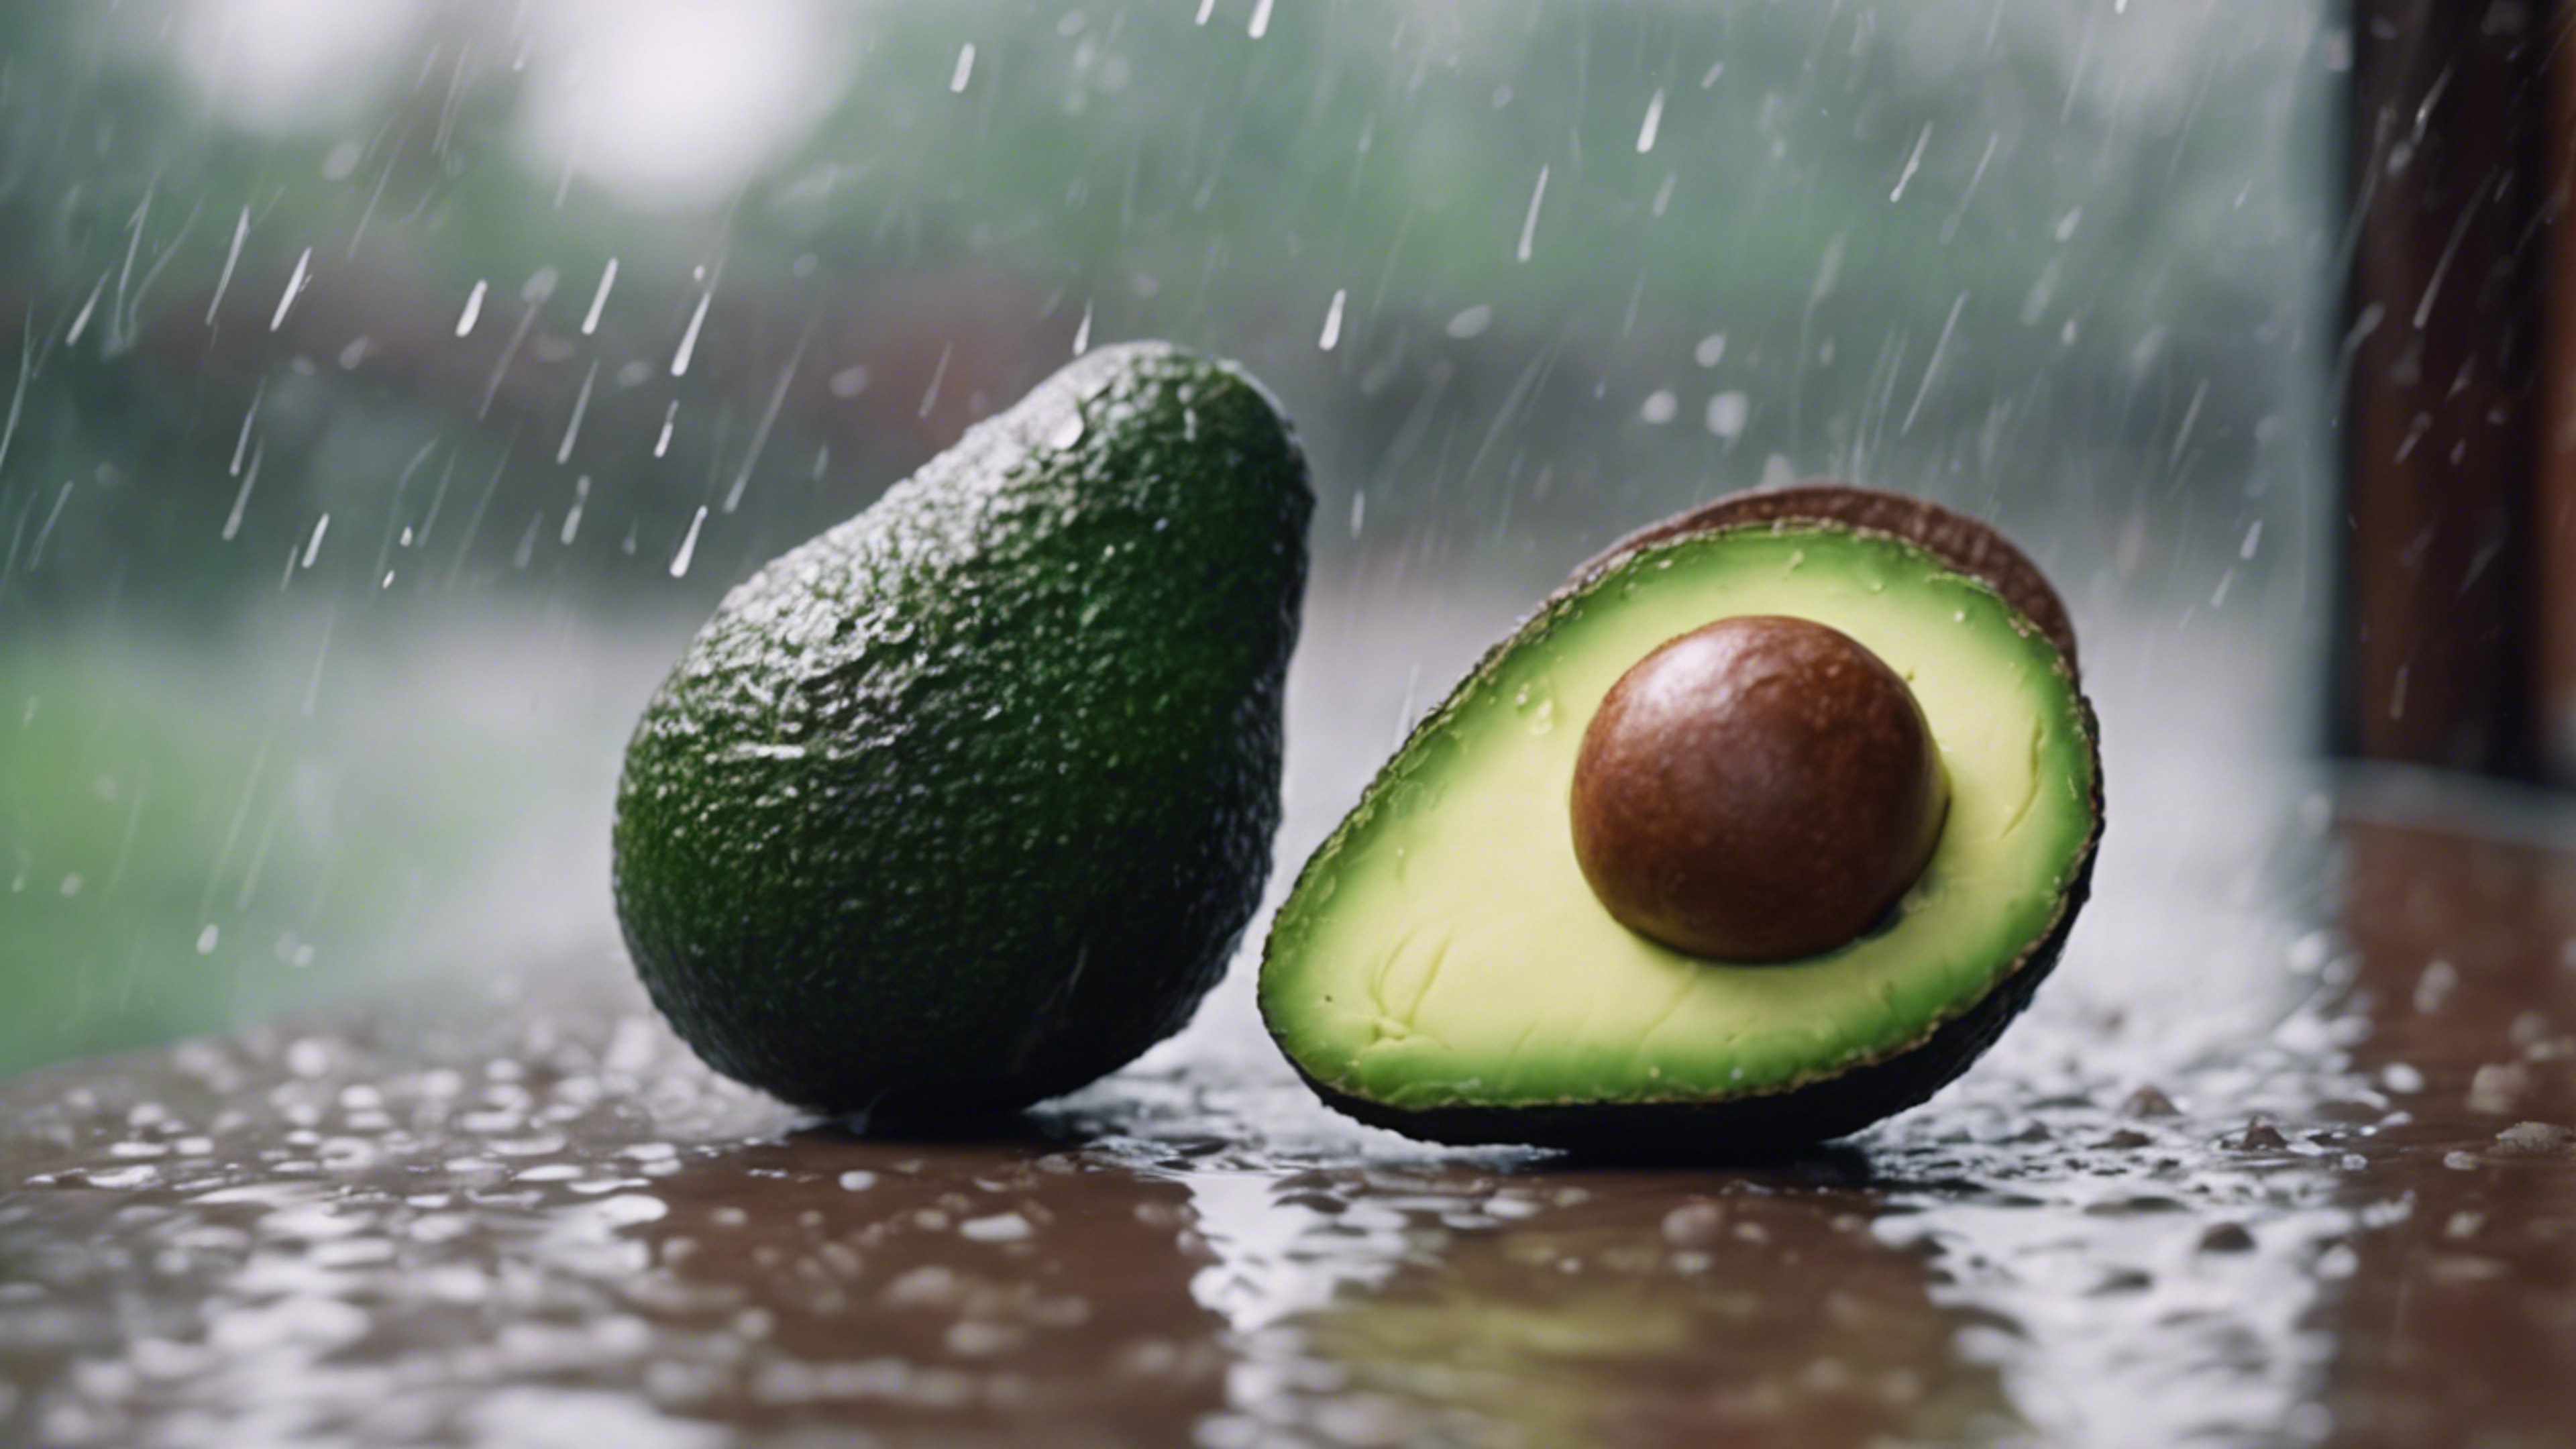 An adorable avocado in a quiet reflection on a rainy day 墙纸[1229e2b9e9634c7f8c86]